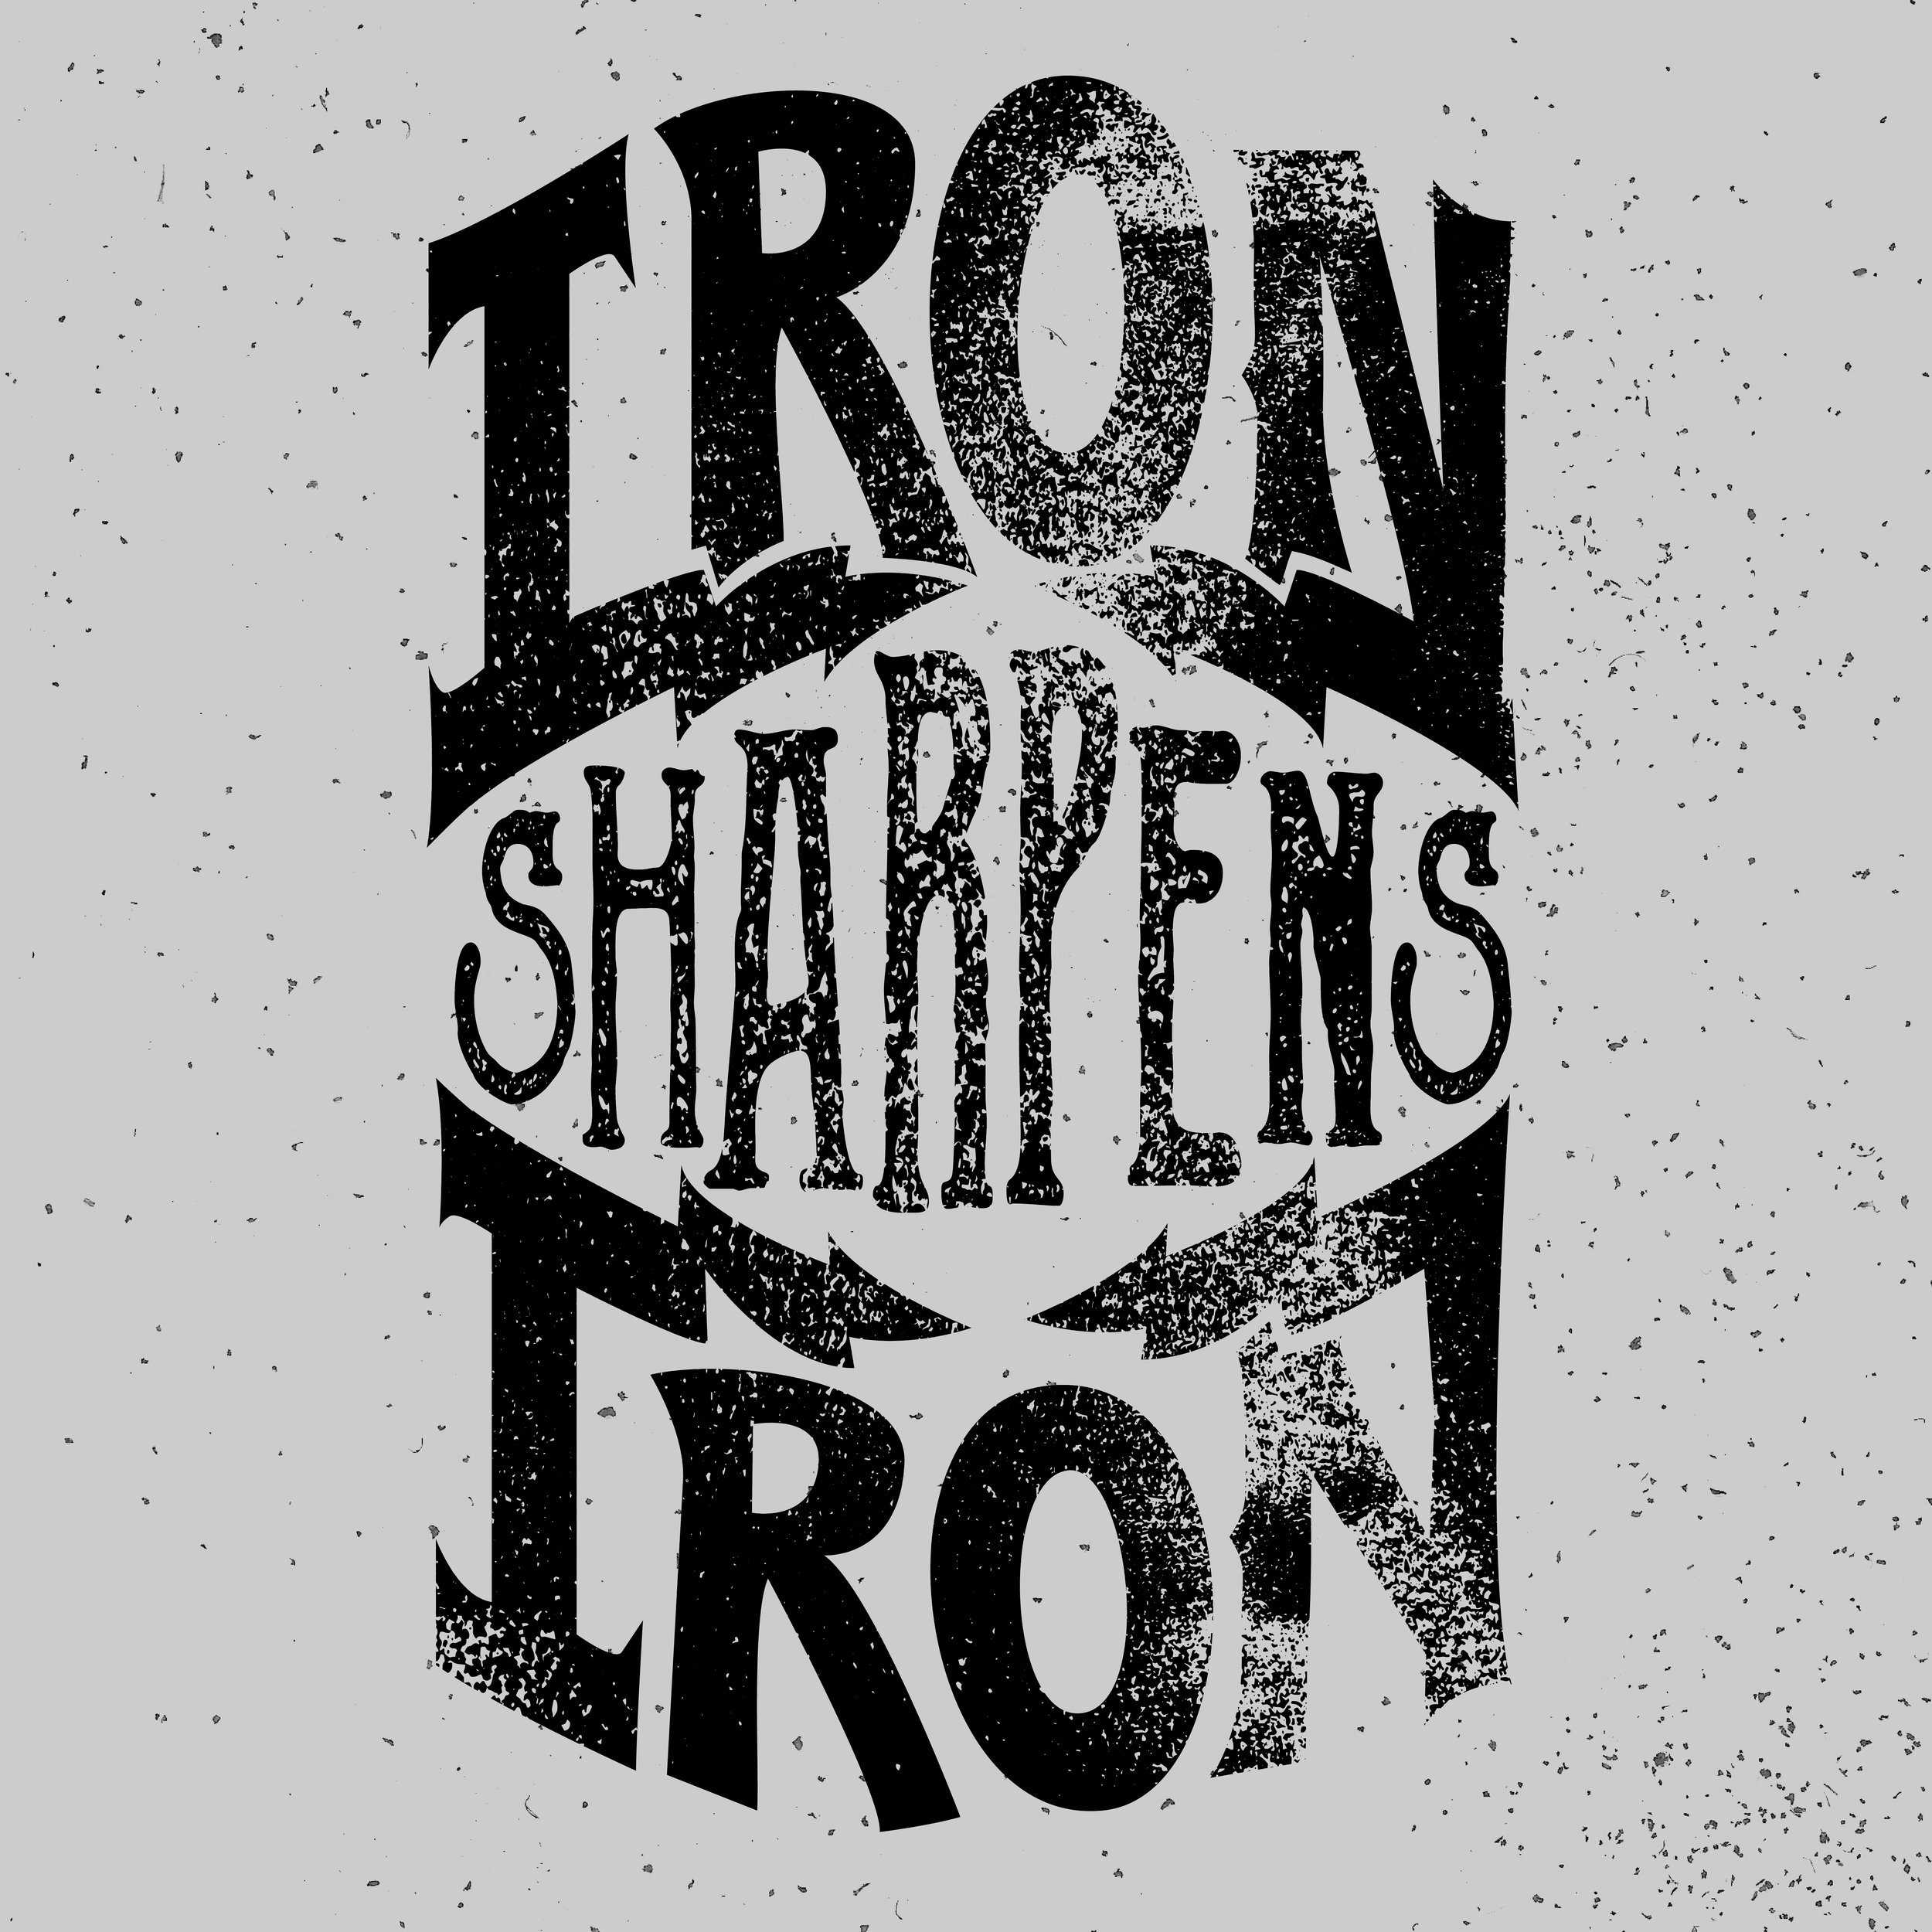 PNG file High quality Iron Sharpens Iron